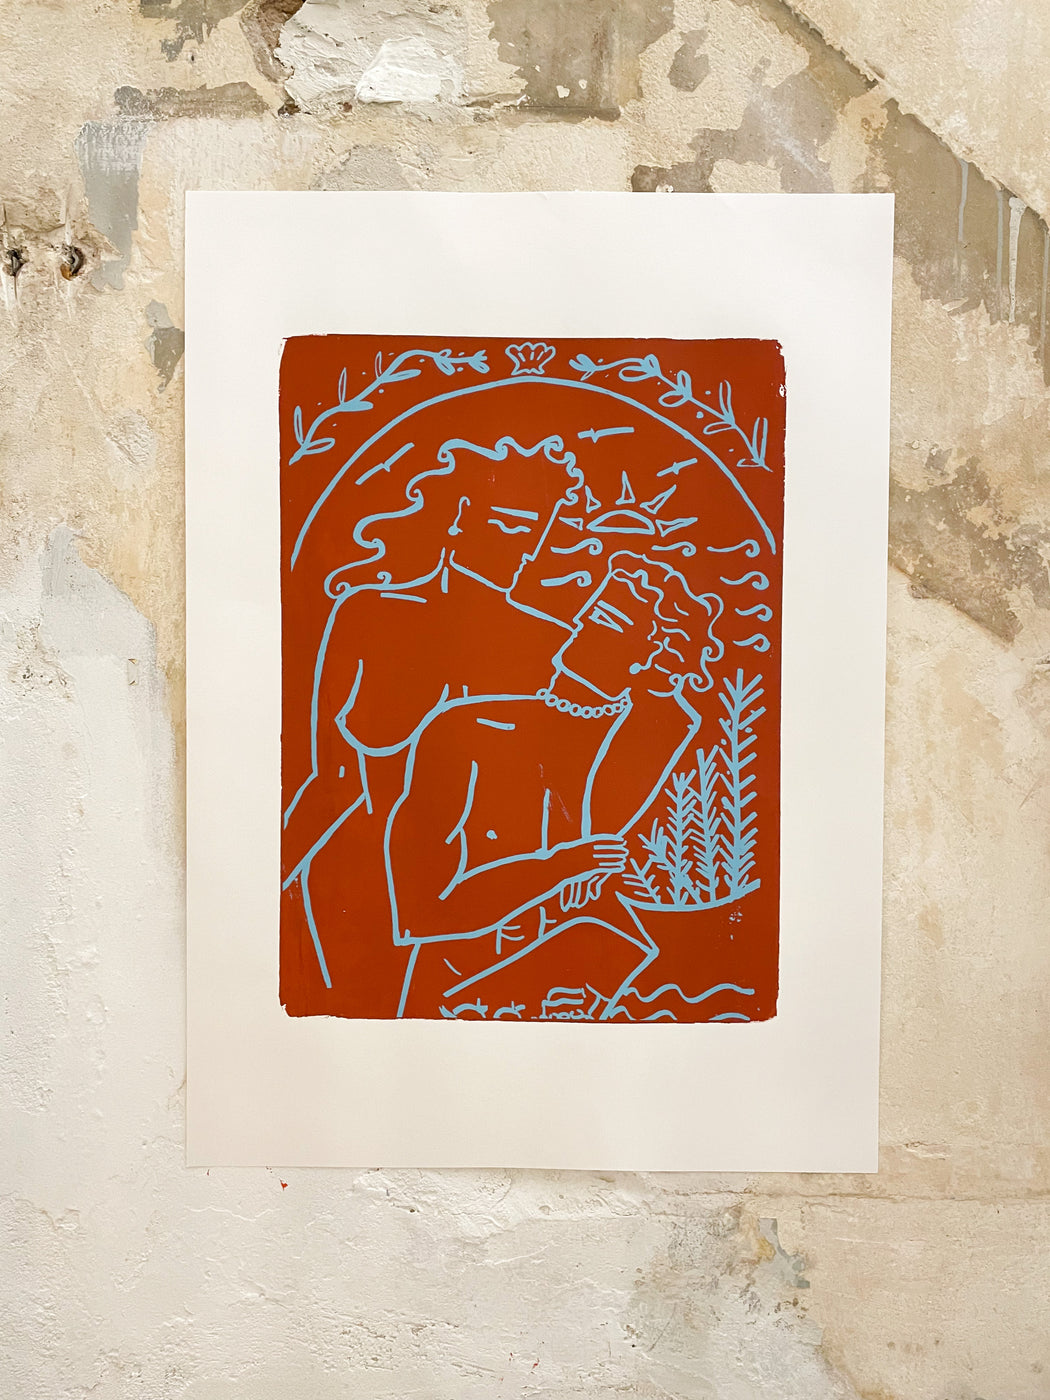 THE COUPLE II - SILSCREEN PRINTED POSTER